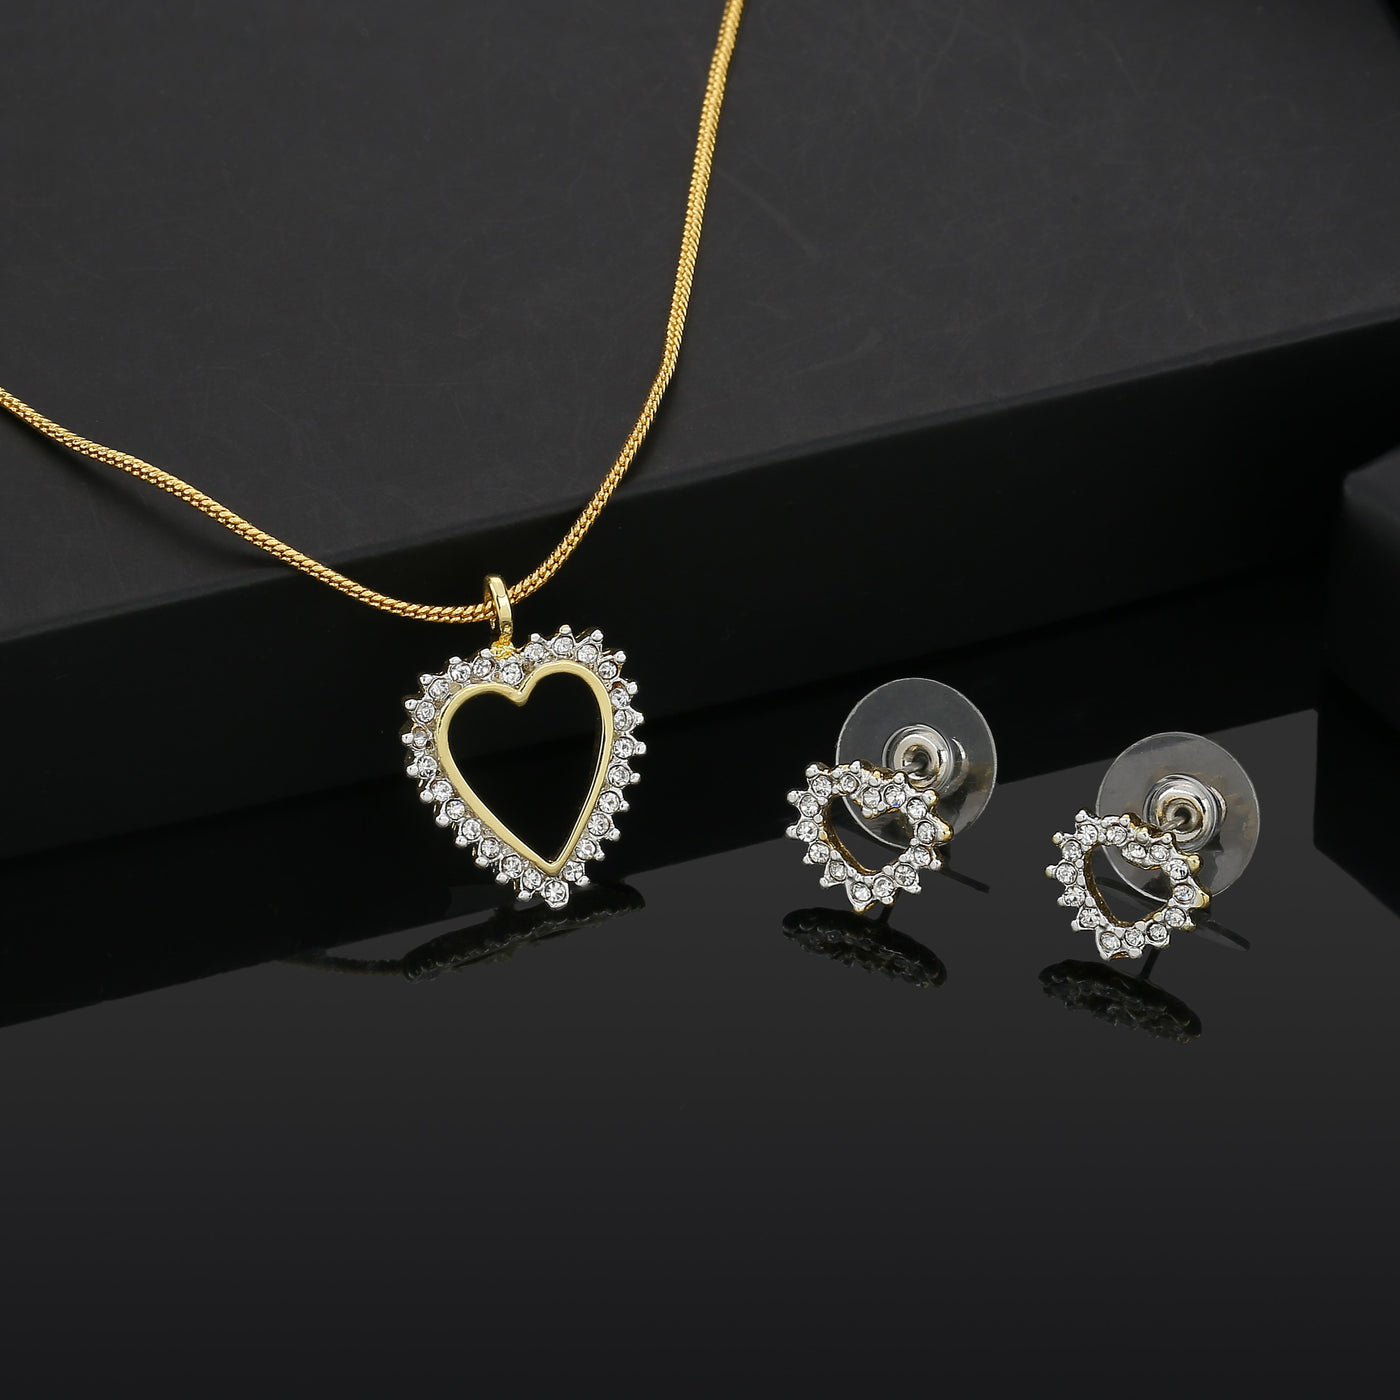 Estele - Valentine special - Trendy and Fancy Fashion Jewellery Design Necklace Set for Women